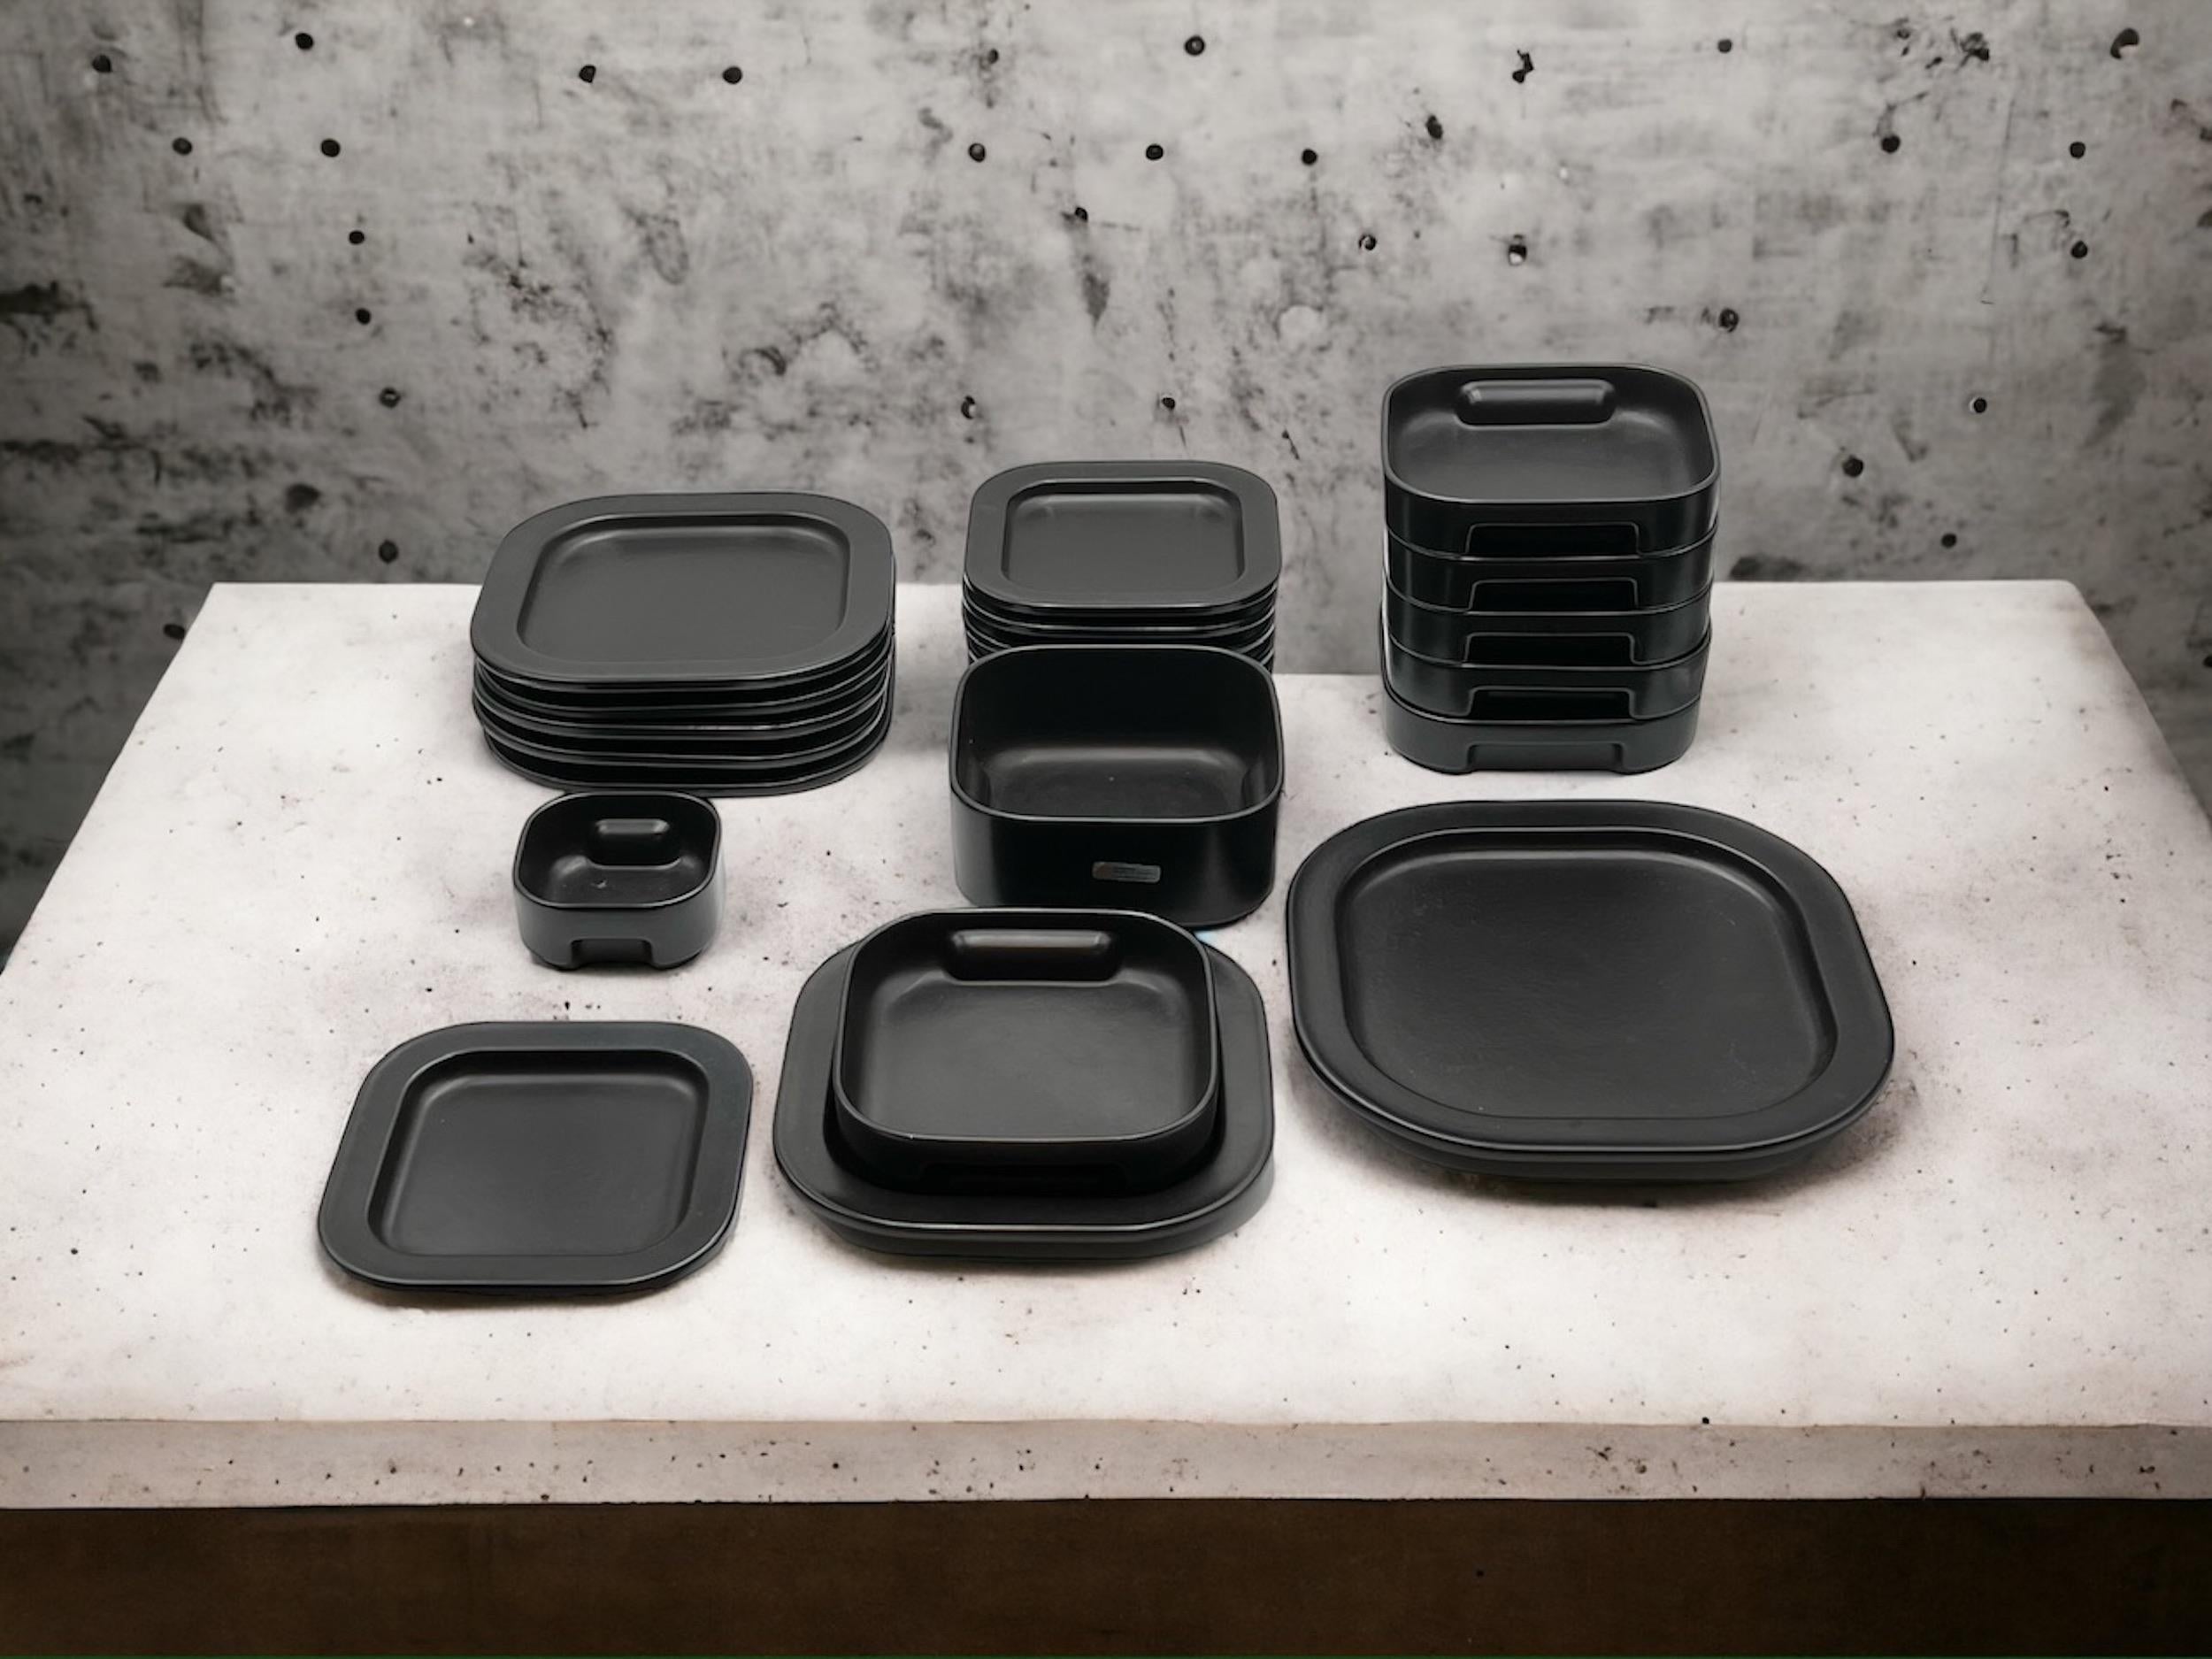 Iconic and rare 70s tableware in black ceramic designed by Makio Hasuike for Arnolfo Di Cambio. 

This amazing set was produced by Ceramiche Ravelli Laveno, with unsurpassed manufacturing quality. The design and color spark the distinctive elegance